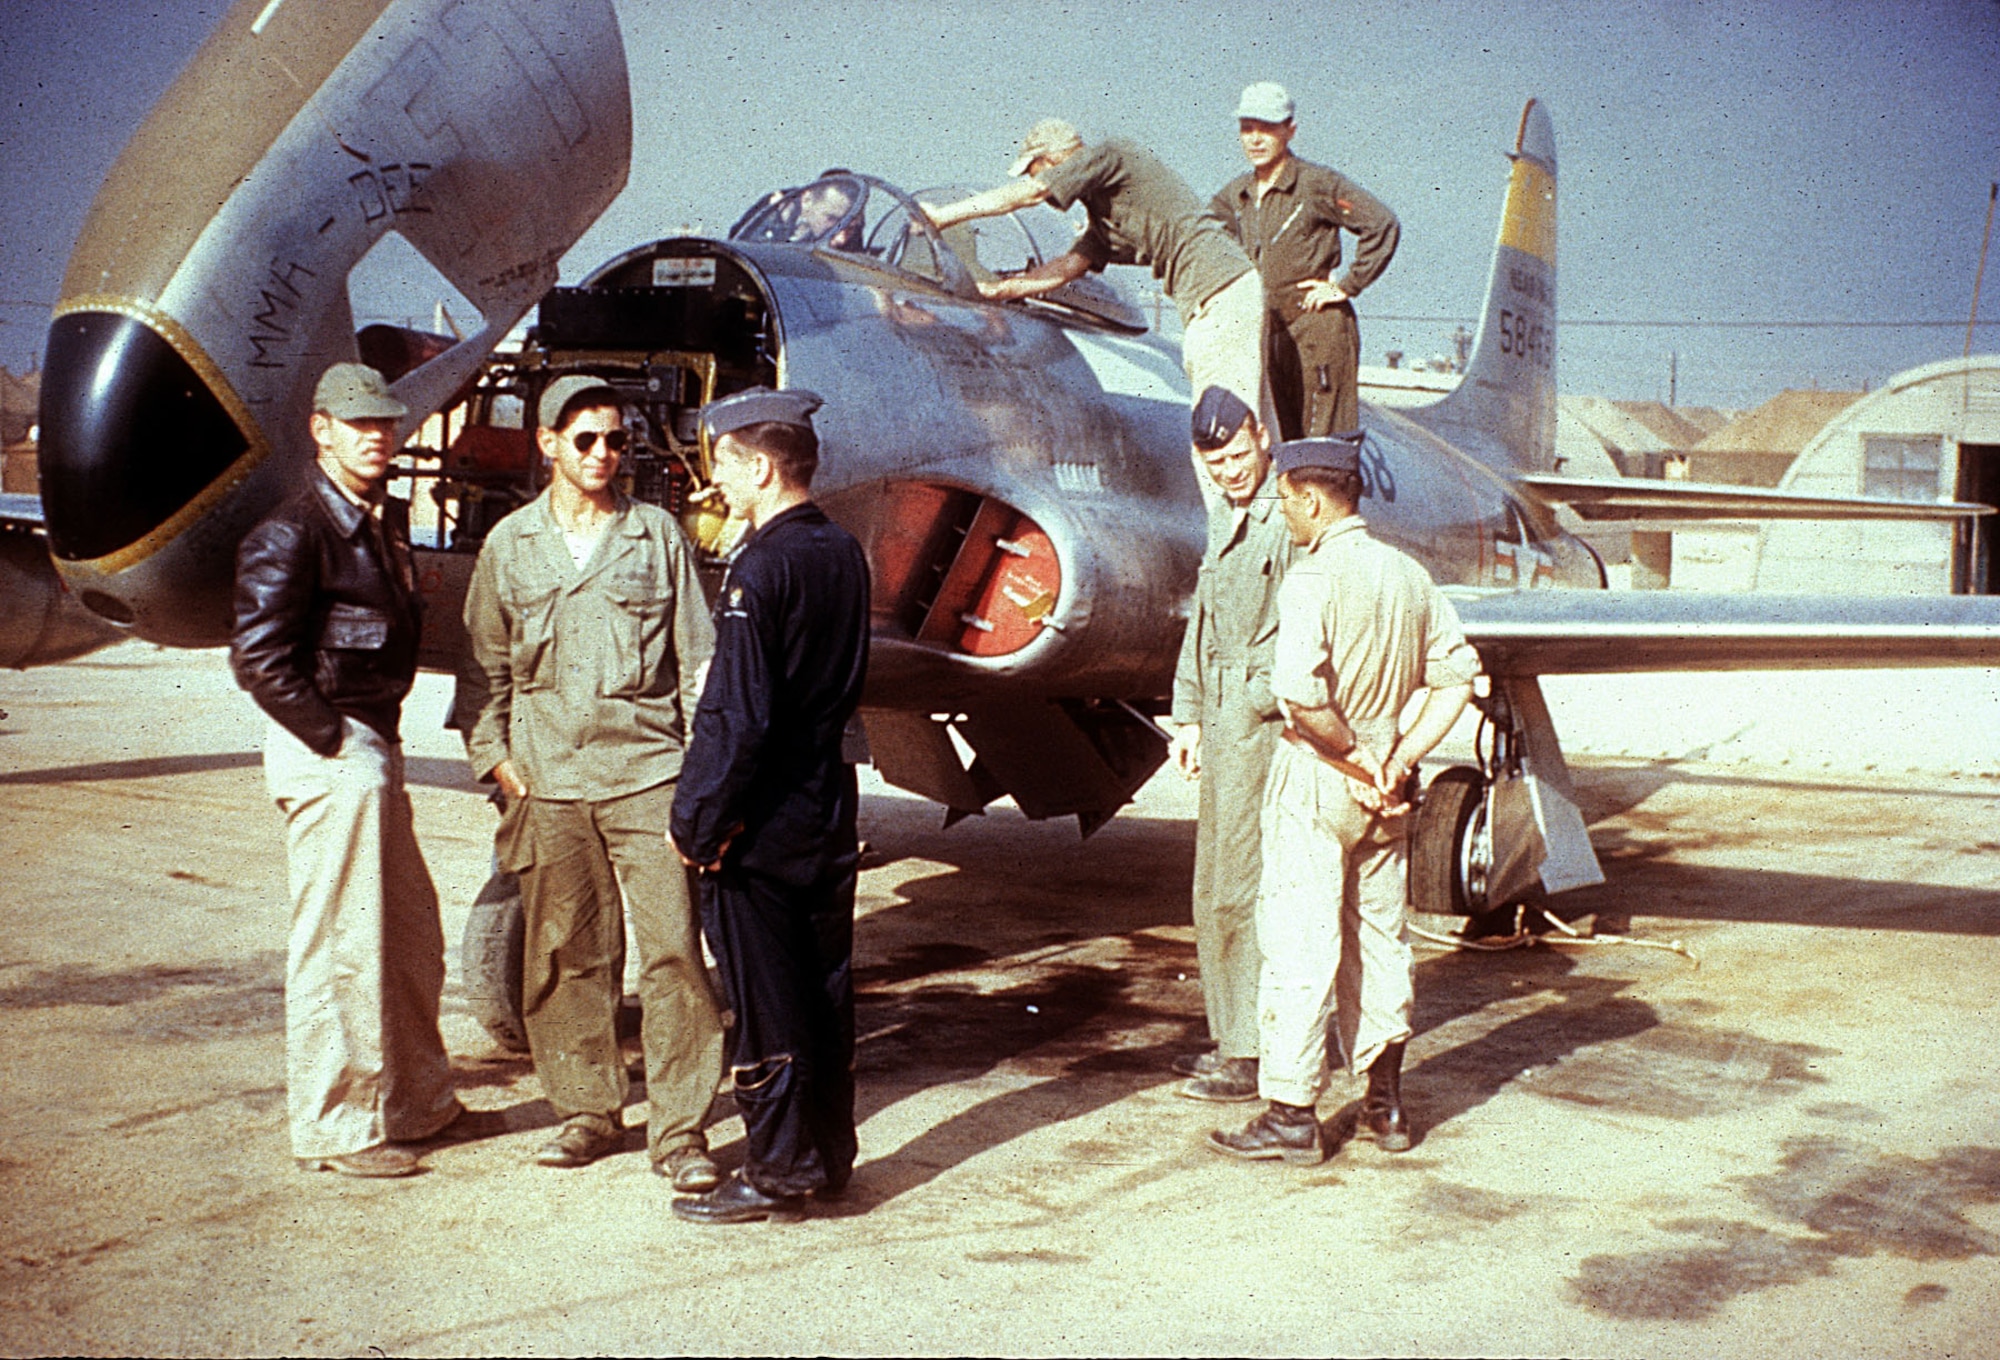 Ground crew prepare to fit the RF-80 "Emma-Dee" with nose cameras as reconnaissance pilots  watch. (U.S. Air Force photo)